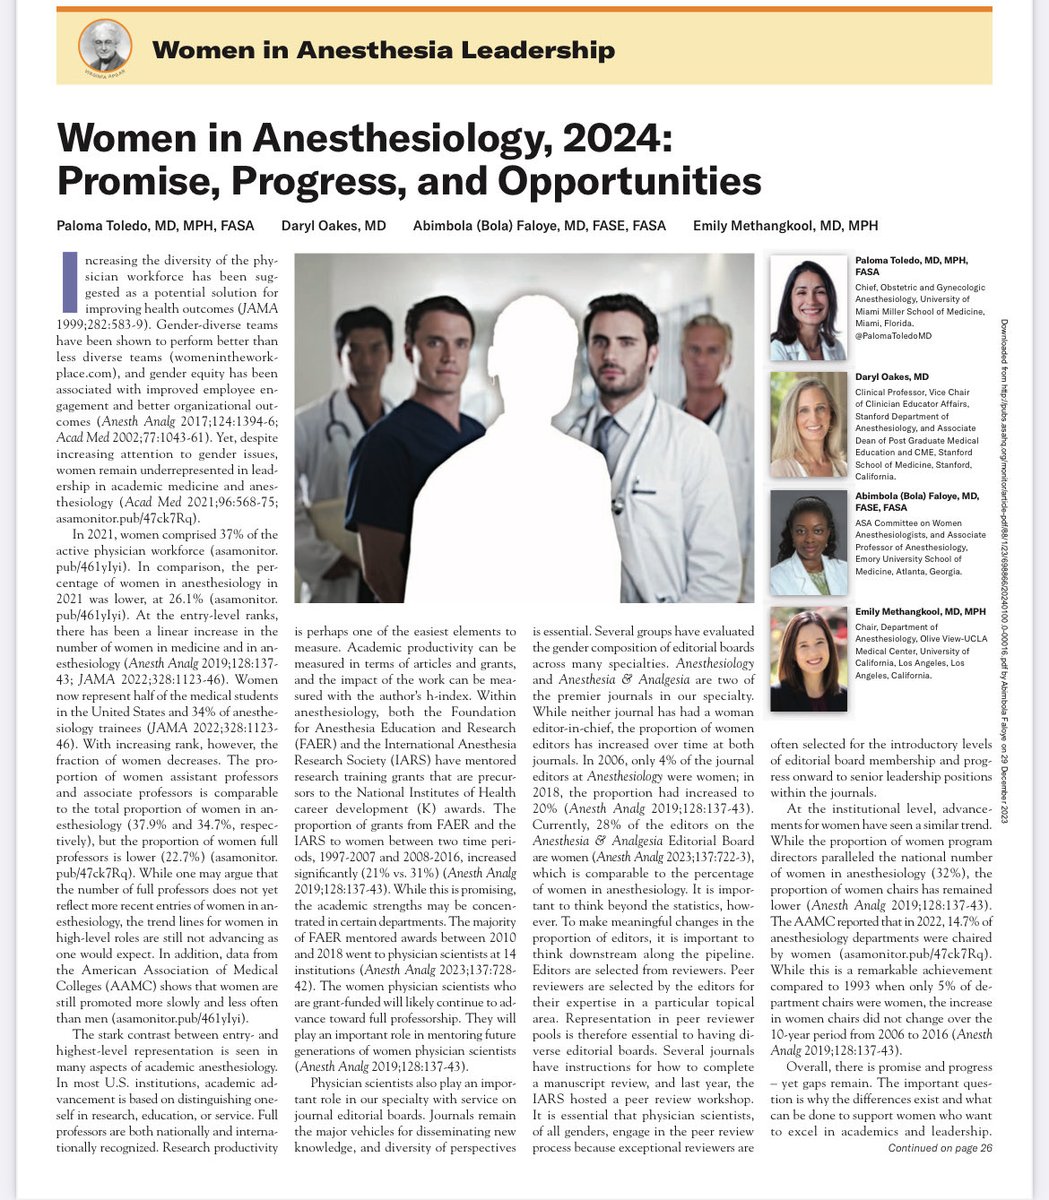 On the trail to equity in Anesthesiology- we have made some progress but still a long way to go. ⁦@ASAMonitor⁩ ⁦@ASALifeline⁩ ⁦@PalomaToledoMD⁩ ⁦@daryloakes4⁩ ⁦@dremilym⁩ ⁦@EmoryAnesthesia⁩ ⁦⁦@WomenInCTAnes⁩ pubs.asahq.org/monitor/articl…